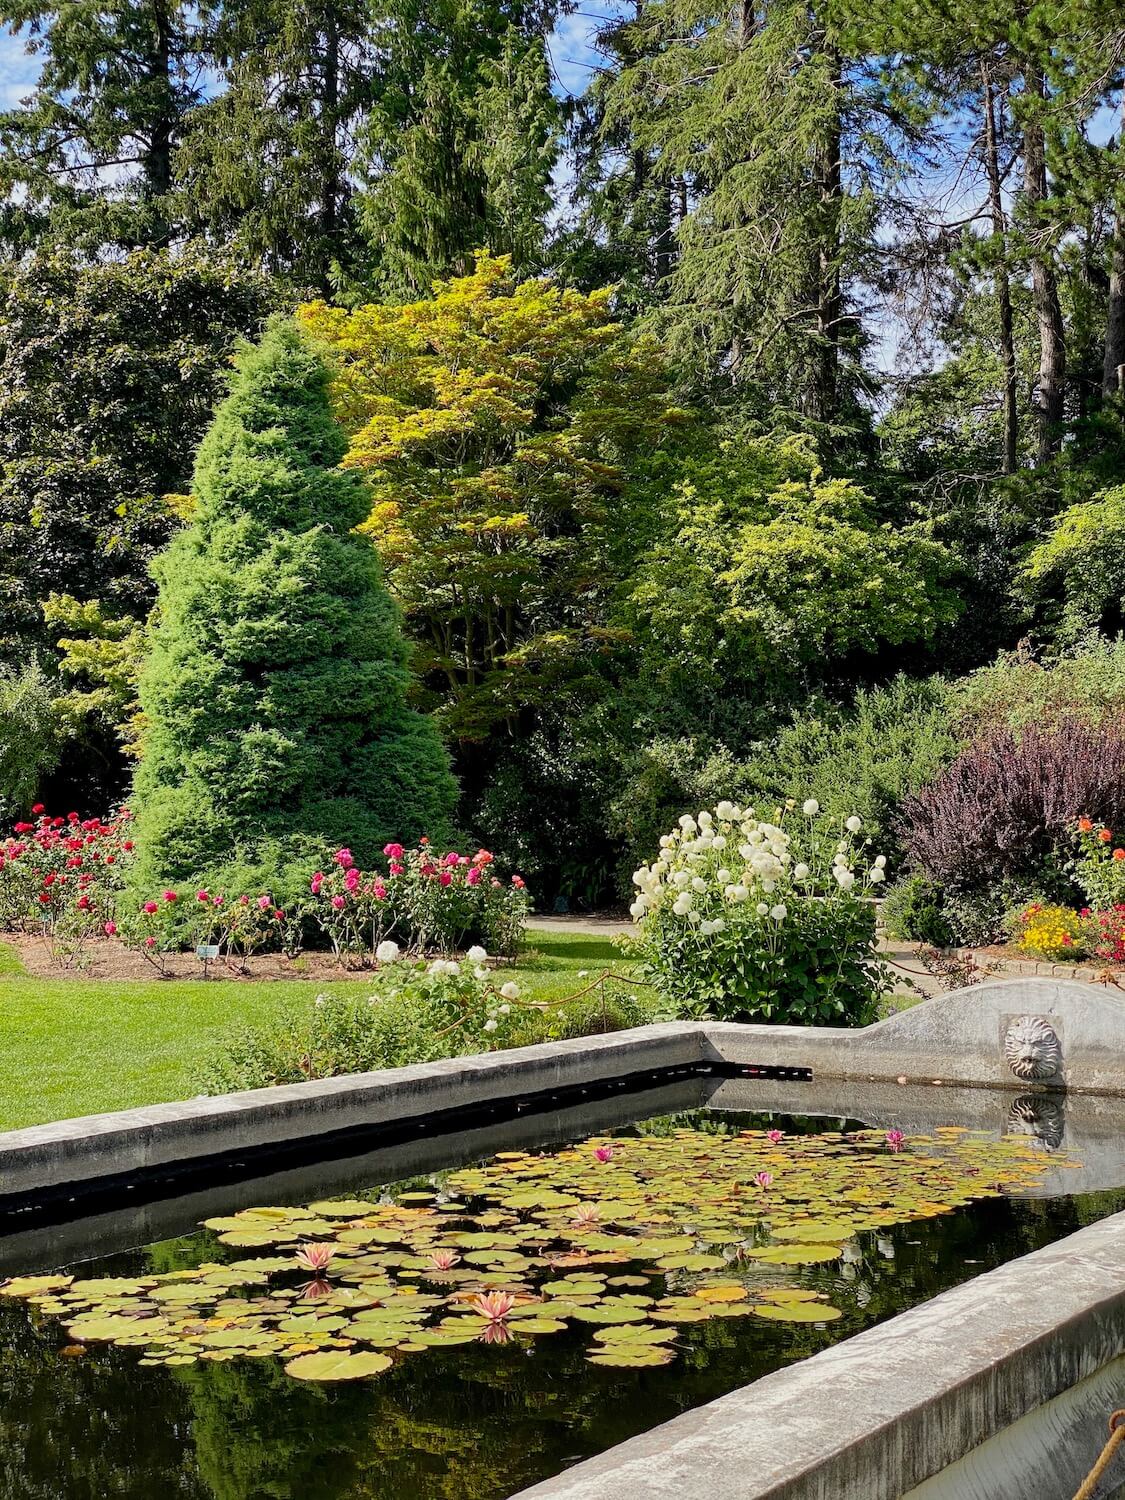 Those moving to Seattle will enjoy all the beautiful botanical gardens like this formal rose garden.  Here a concrete pond holds delicate green lily pads while bushes and trees of various textures and colors provide a backdrop beyond a formal green grassy lawn.